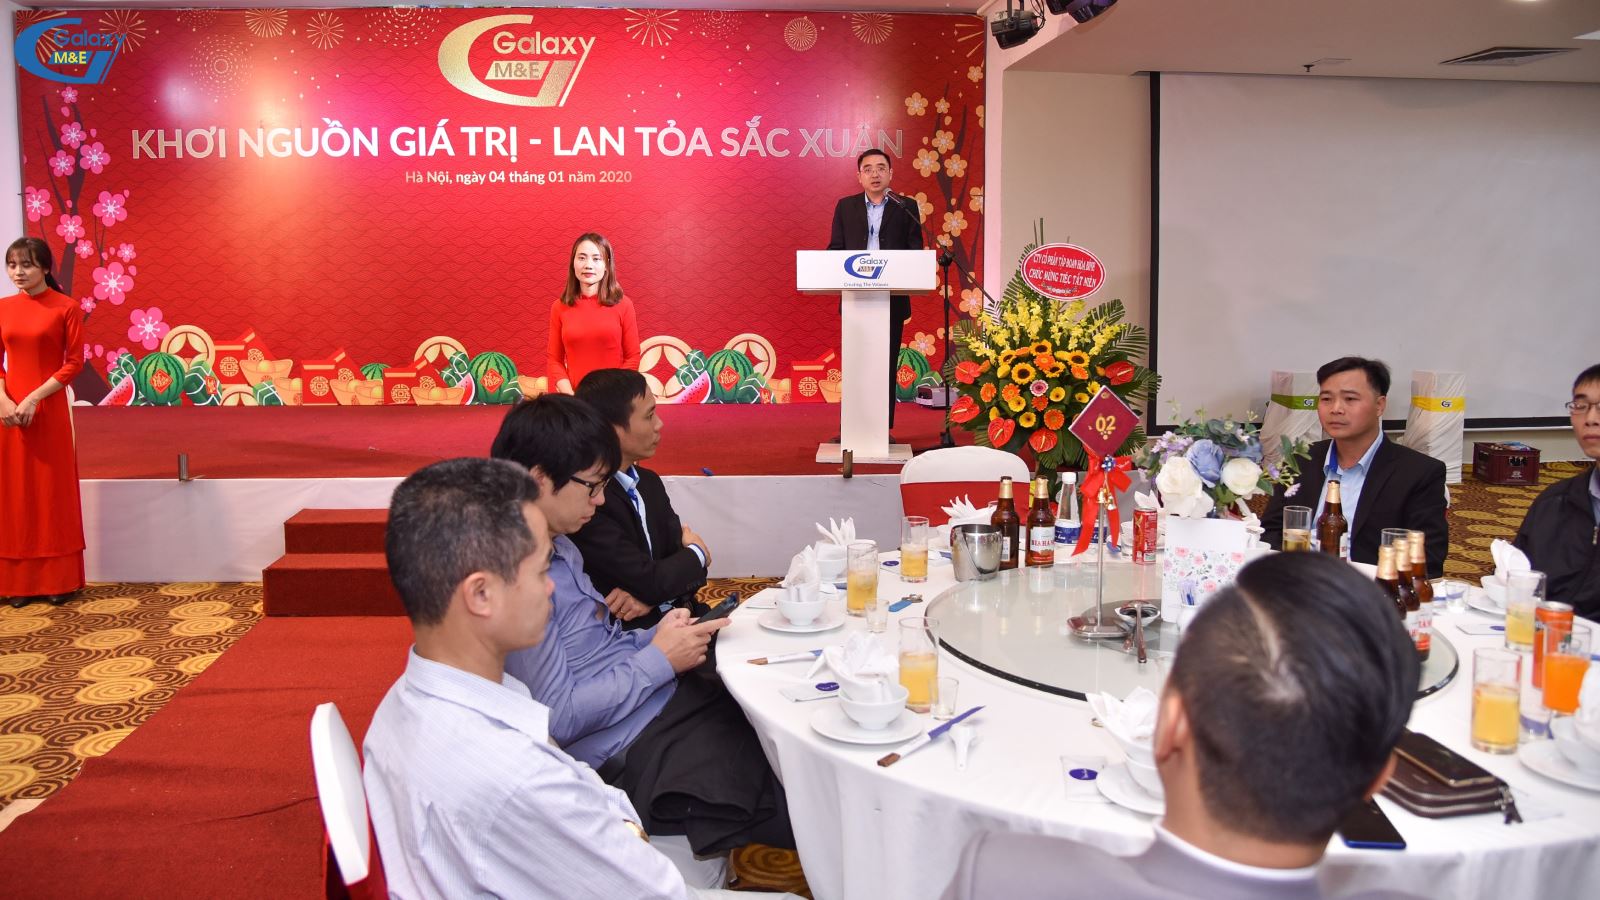 Mr. Do Dang Binh - Galaxy M&E Director was happy to be reunited with the employees and close friends of the business. He also sent affection to the officials and employees who couldn’t attend.